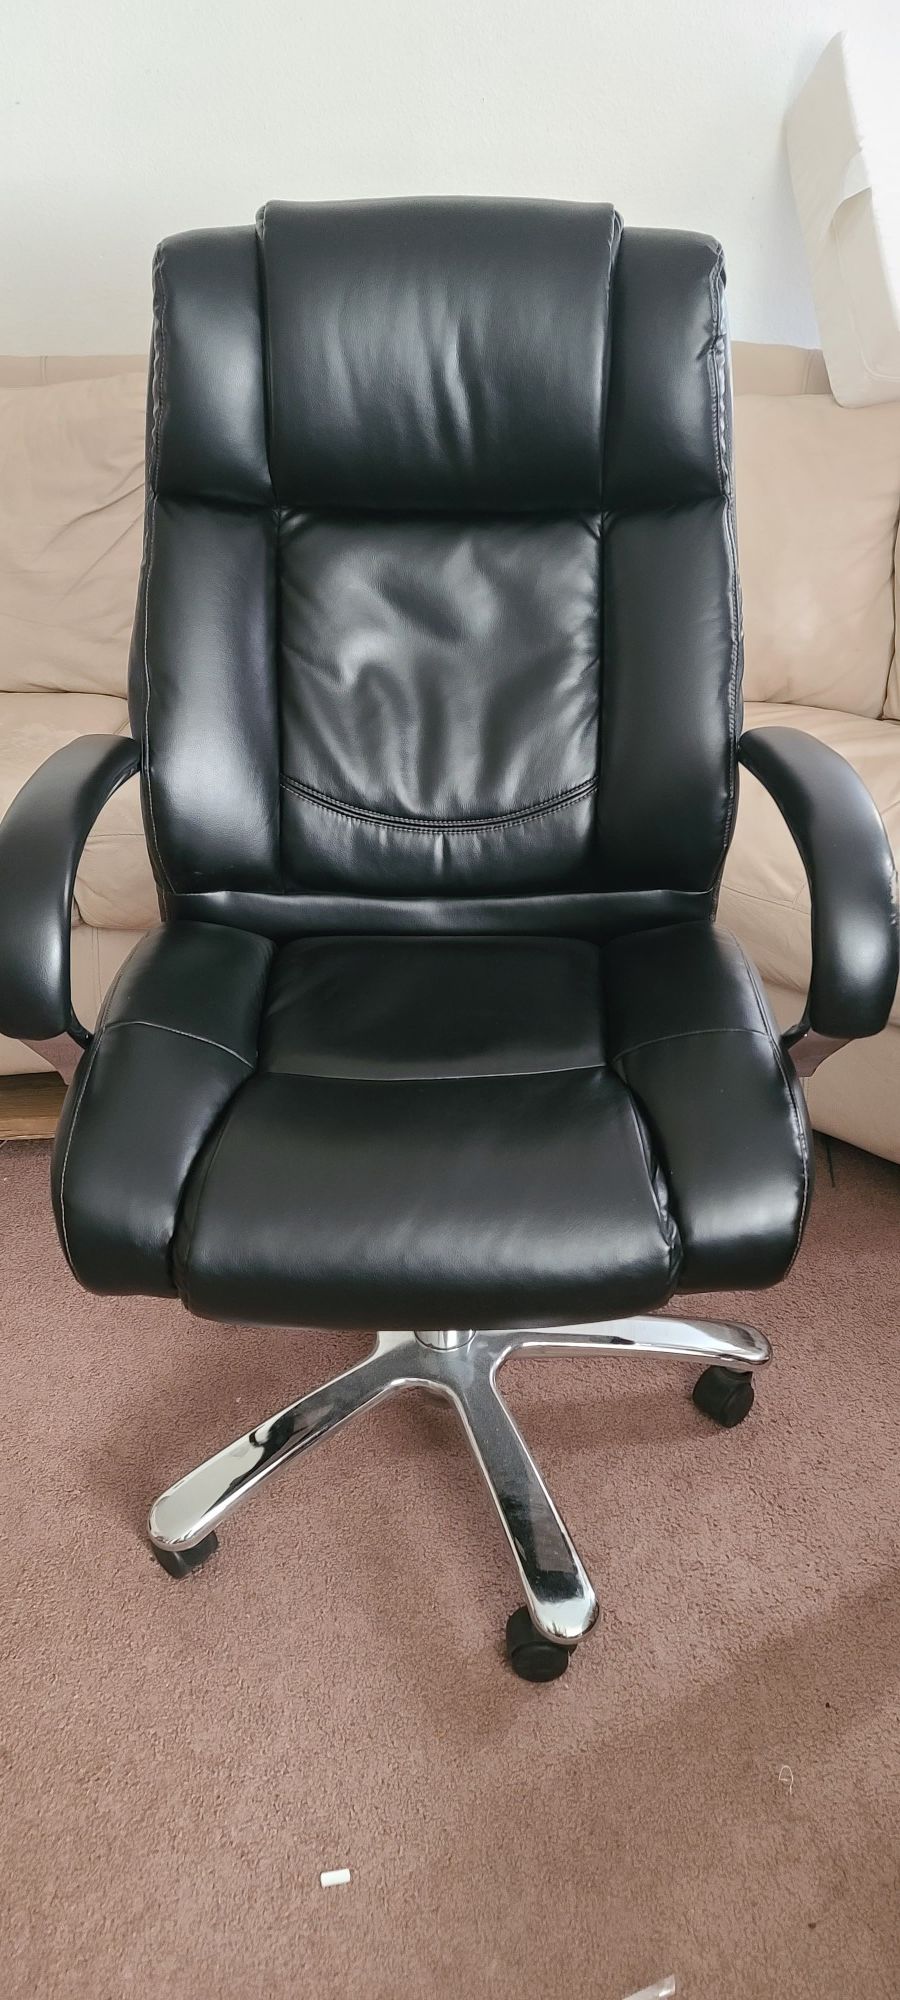 Black leather office chair...